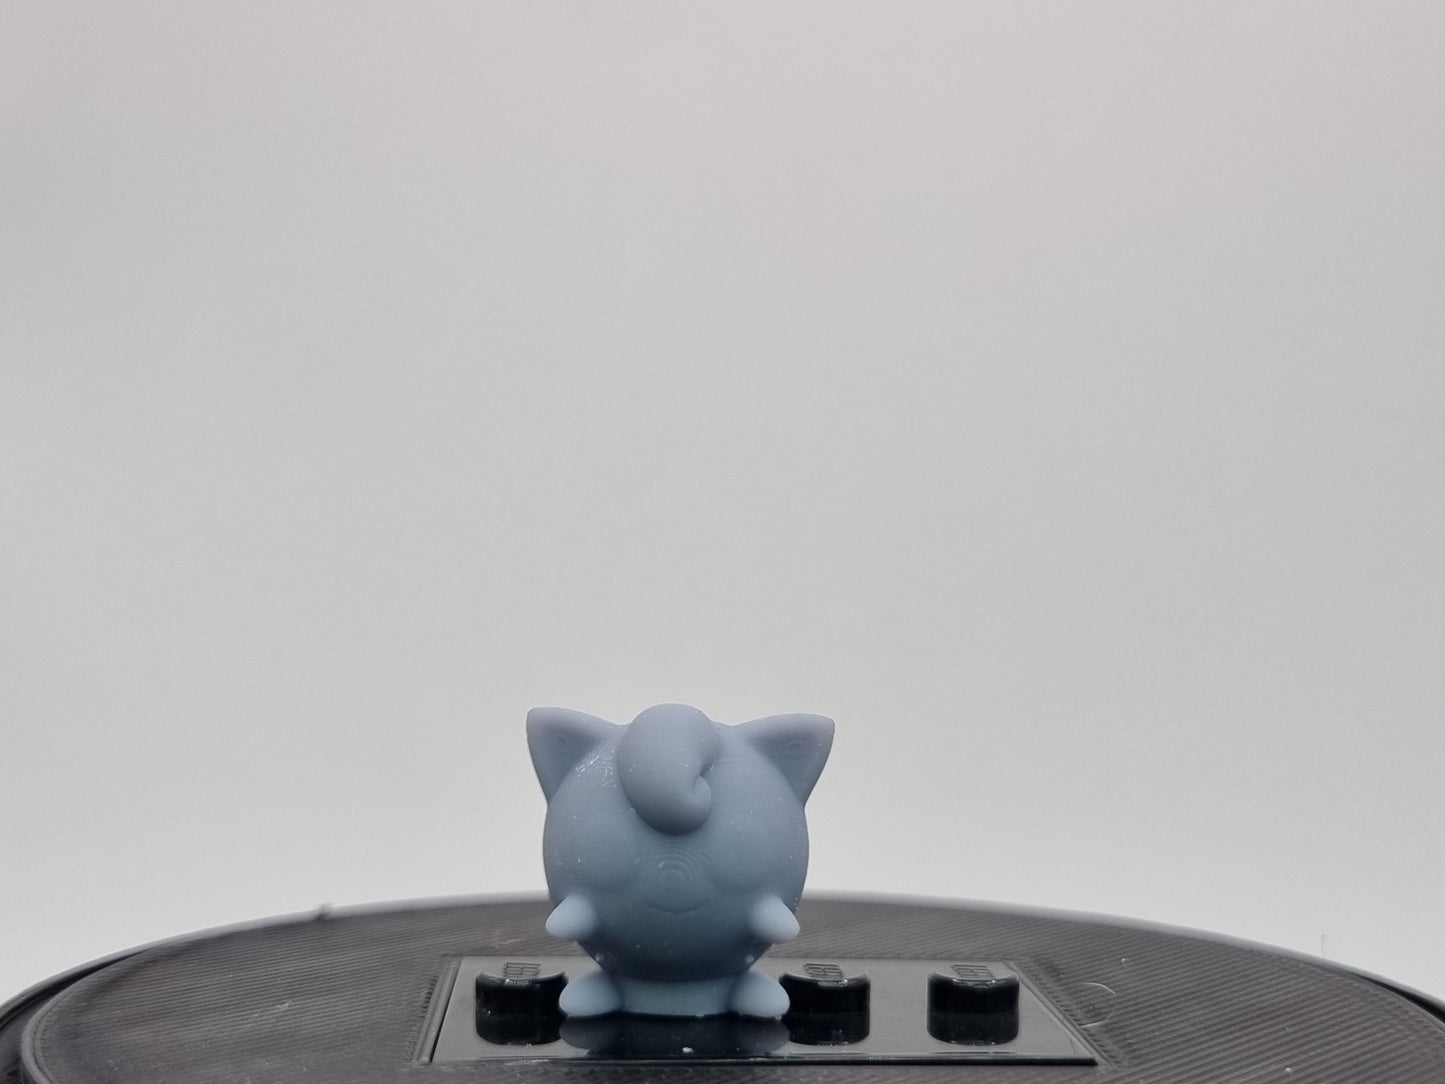 lego compatible 3D printed puffed pet!